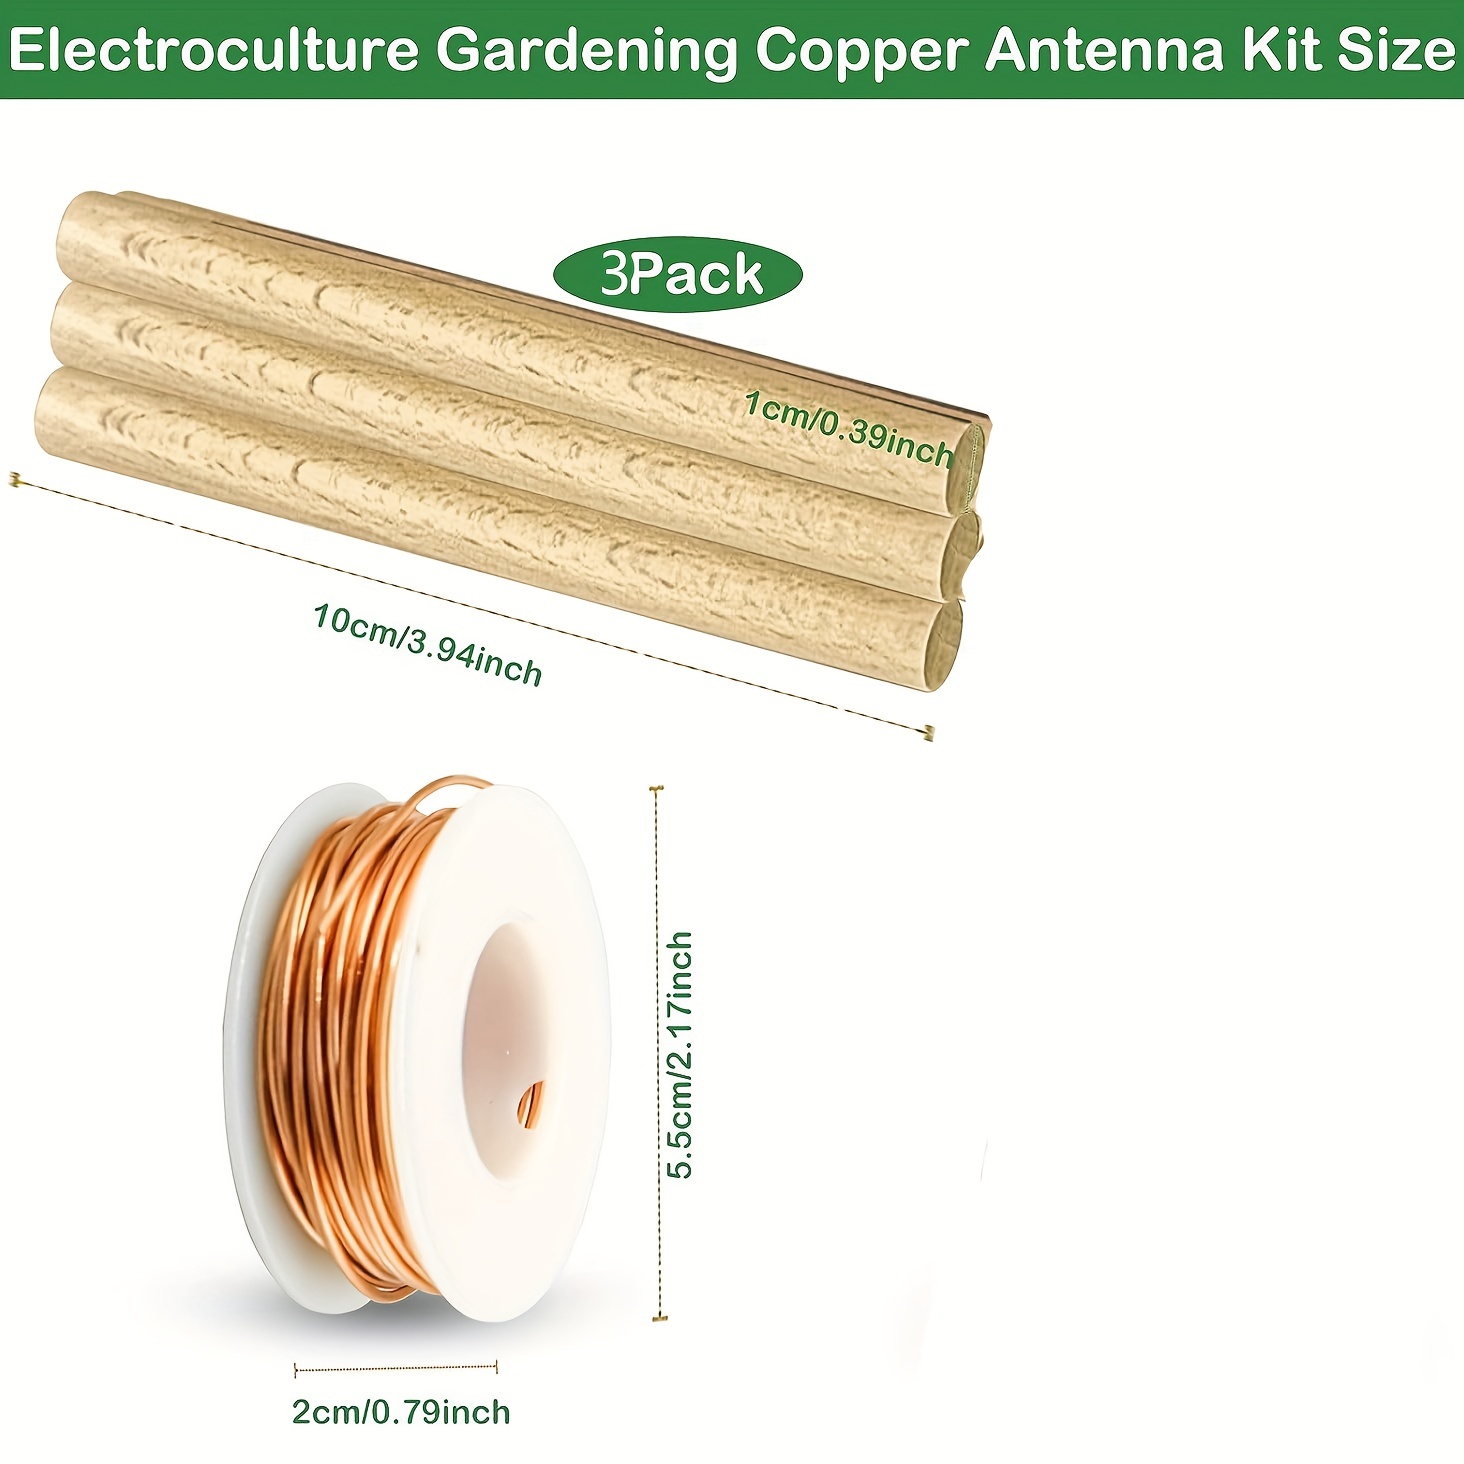 Pure Copper For Electro Culture Gardening Copper Wire With 6 Stake